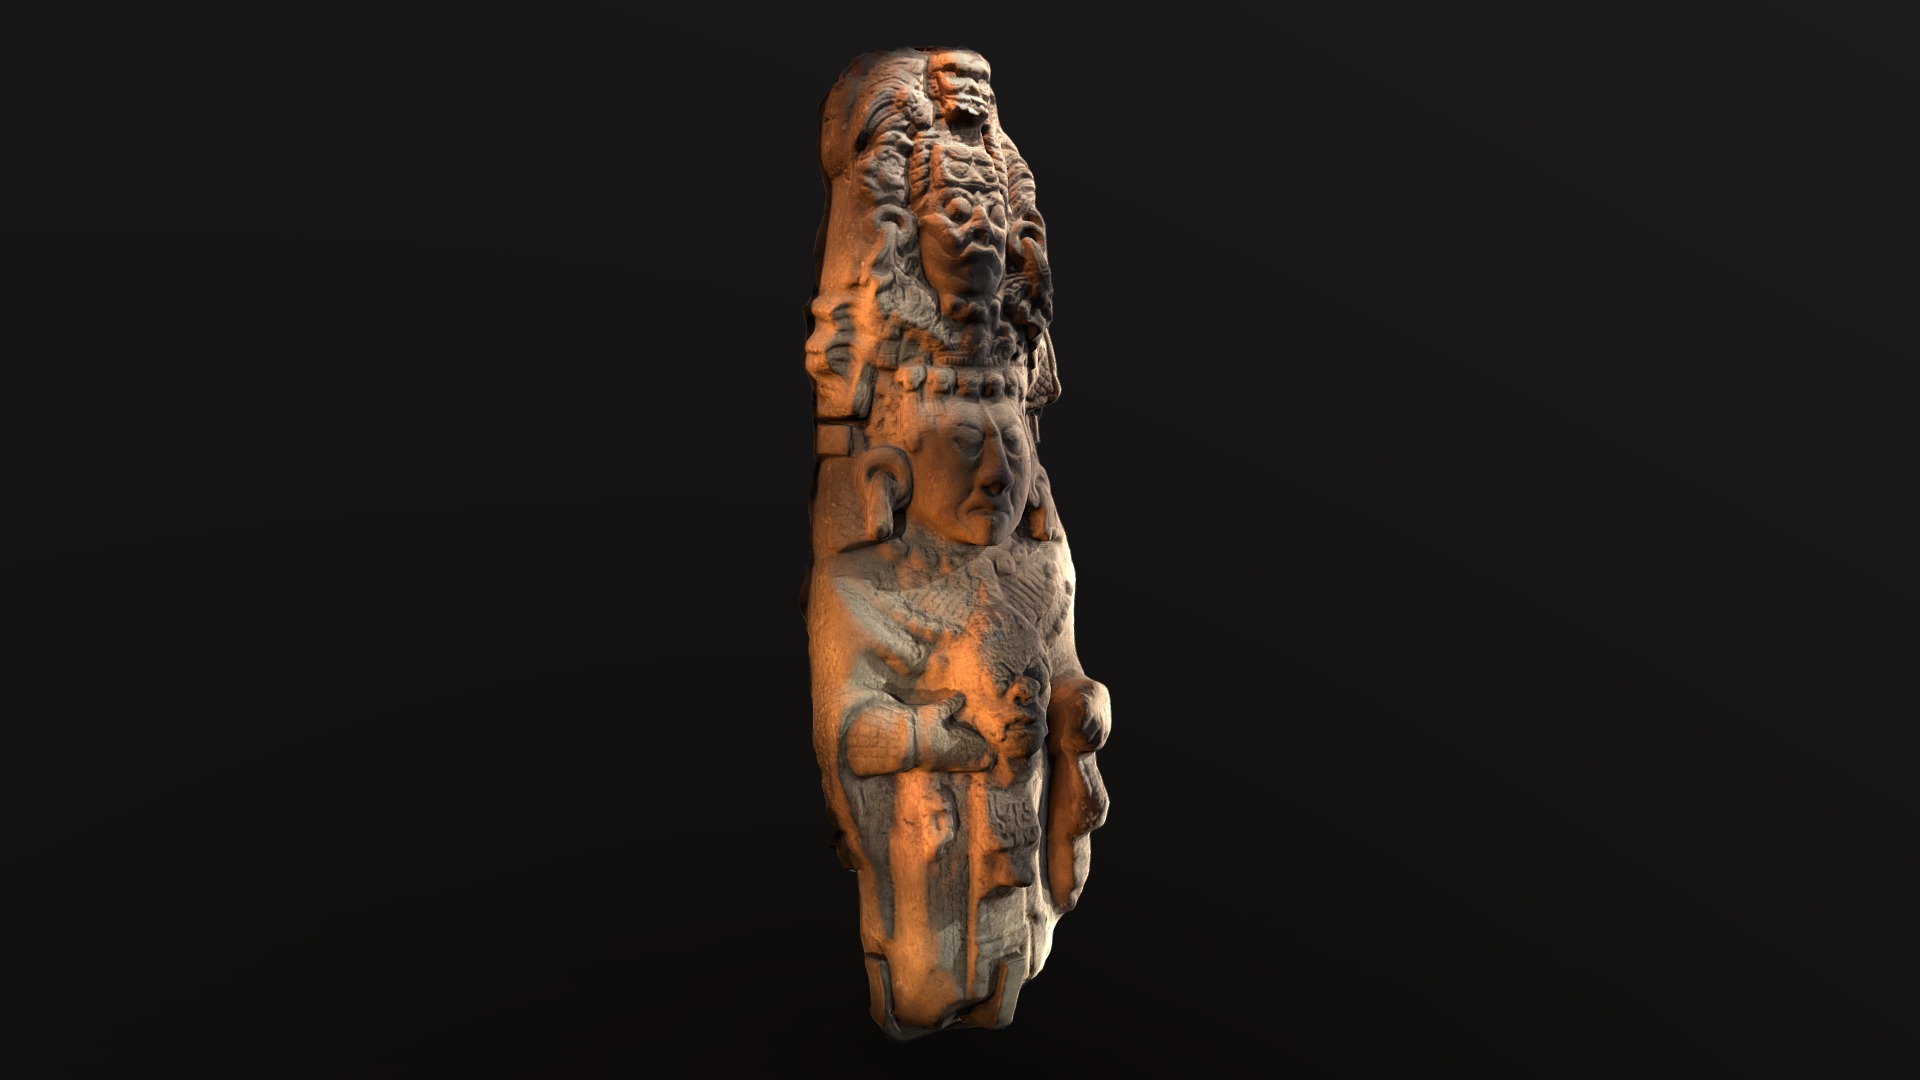 Created in RealityCapture by Capturing Reality from 78 images in 00h:12m:42s.

Scan by austin beaulier
open volumetric - Mayan statue (photogrammetry) - Download Free 3D model by Austin Beaulier (@Austin.Beaulier) 3d model